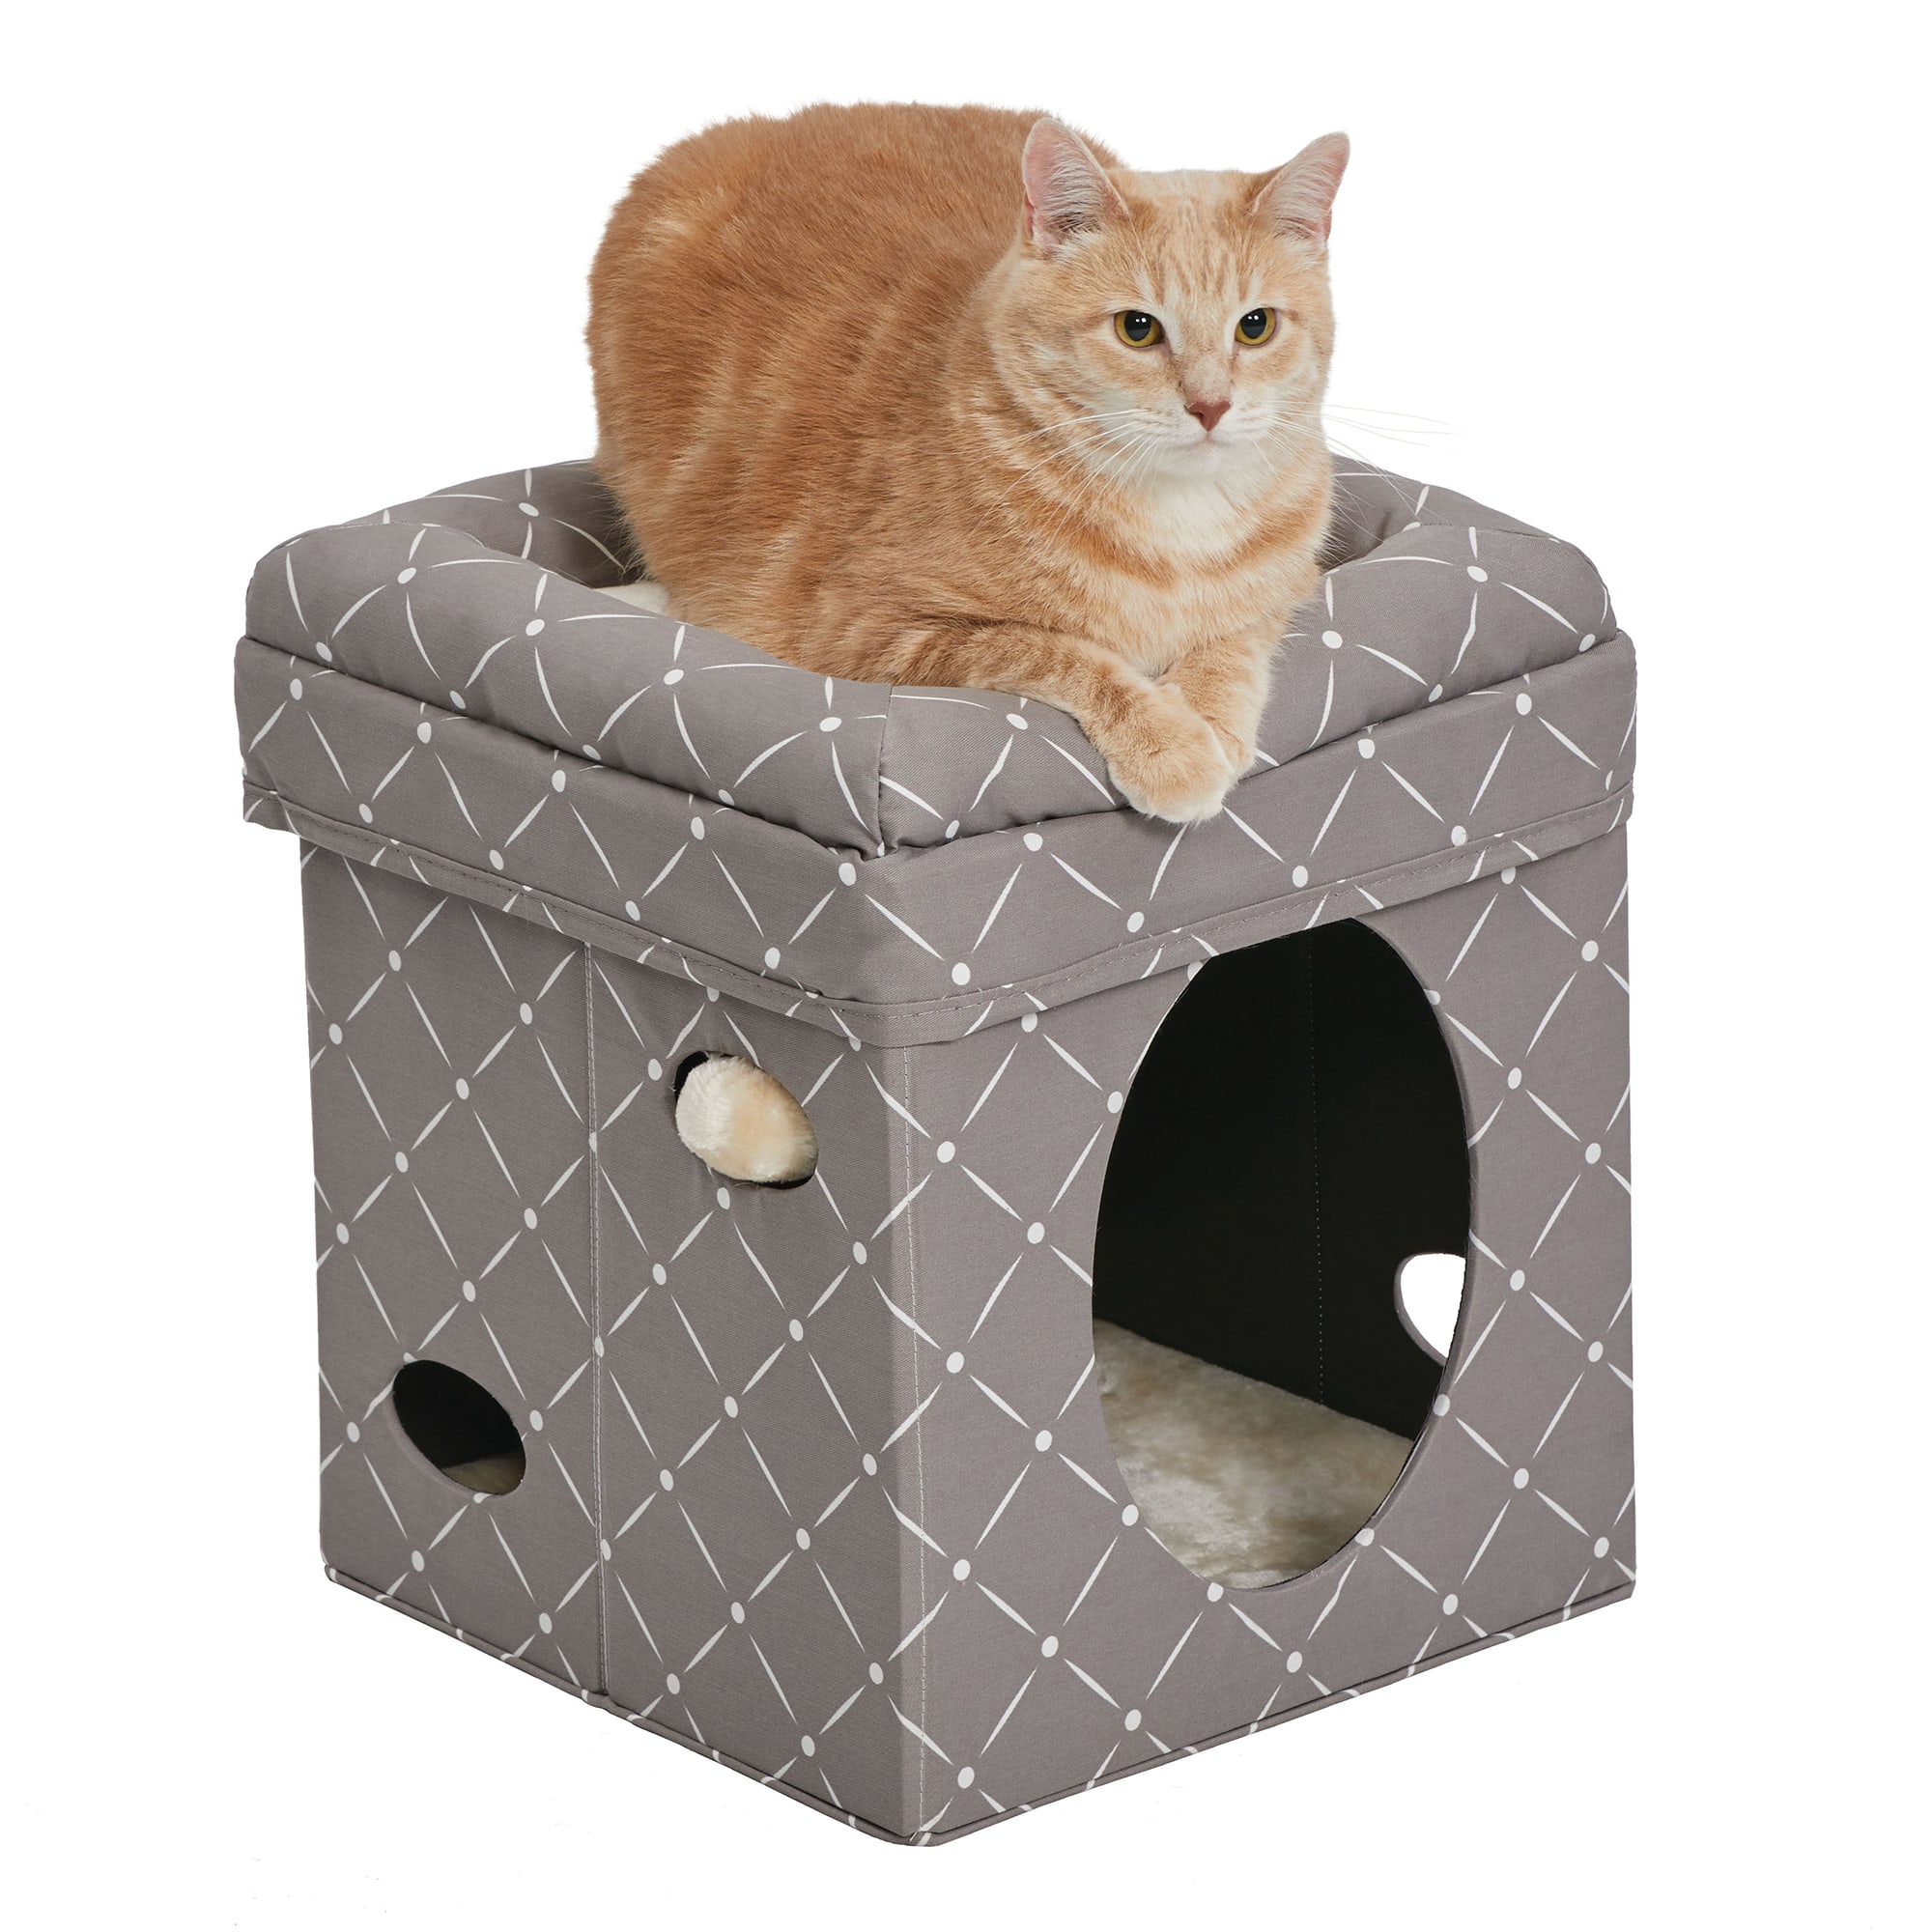 Photos - Bed & Furniture Midwest Curious Mushroom Cat Cube, 16.5" H, Gray 137-MRD 